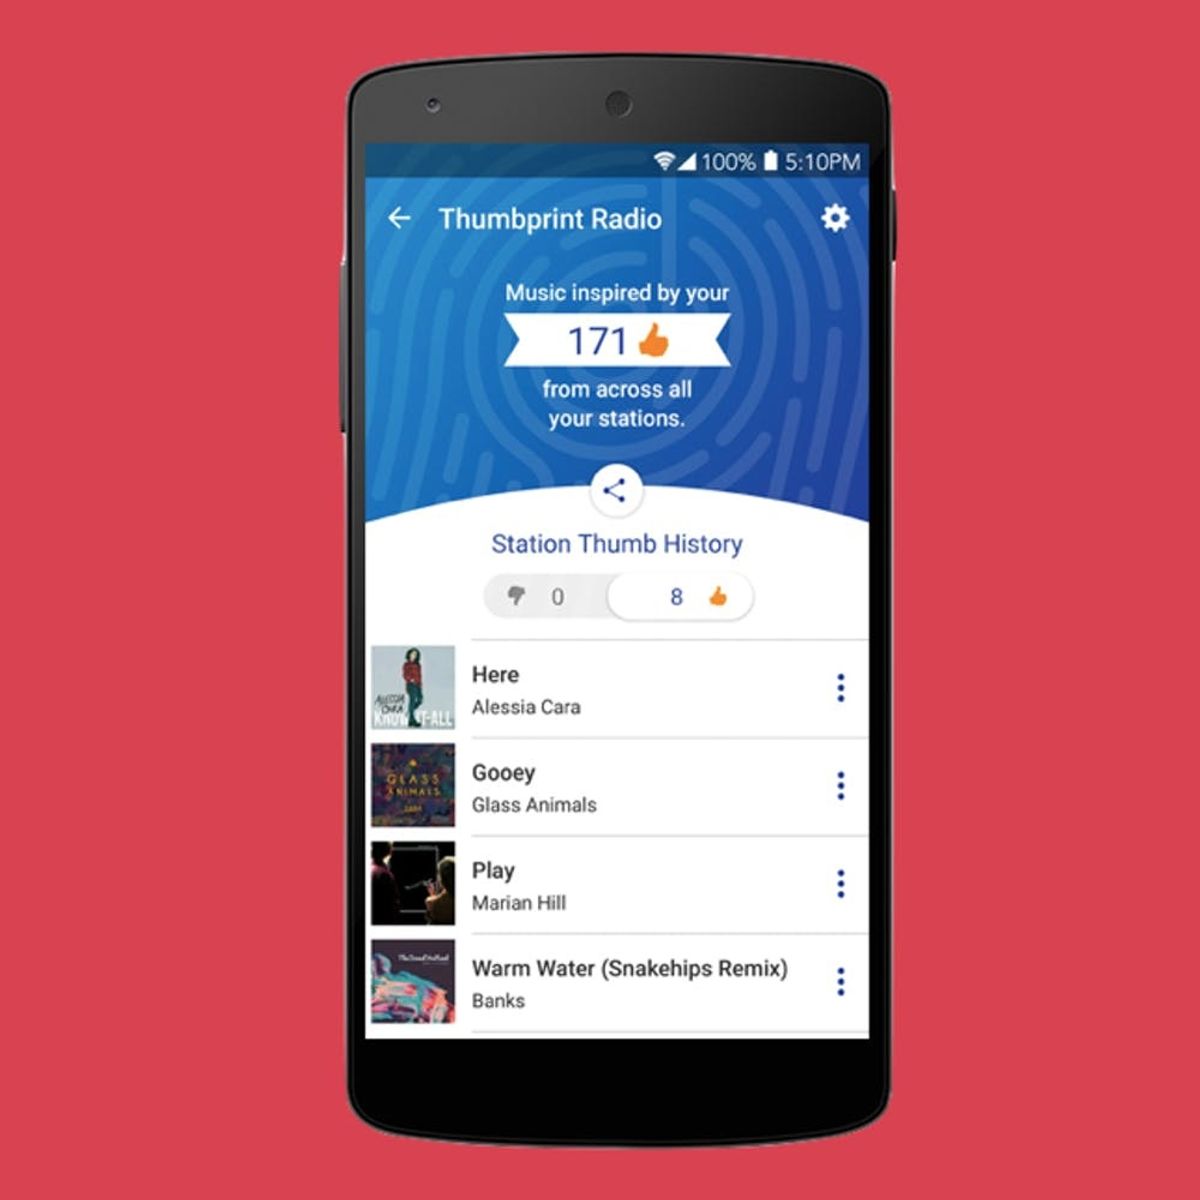 Pandora’s New Update Is Going to Change the Way You Share Music